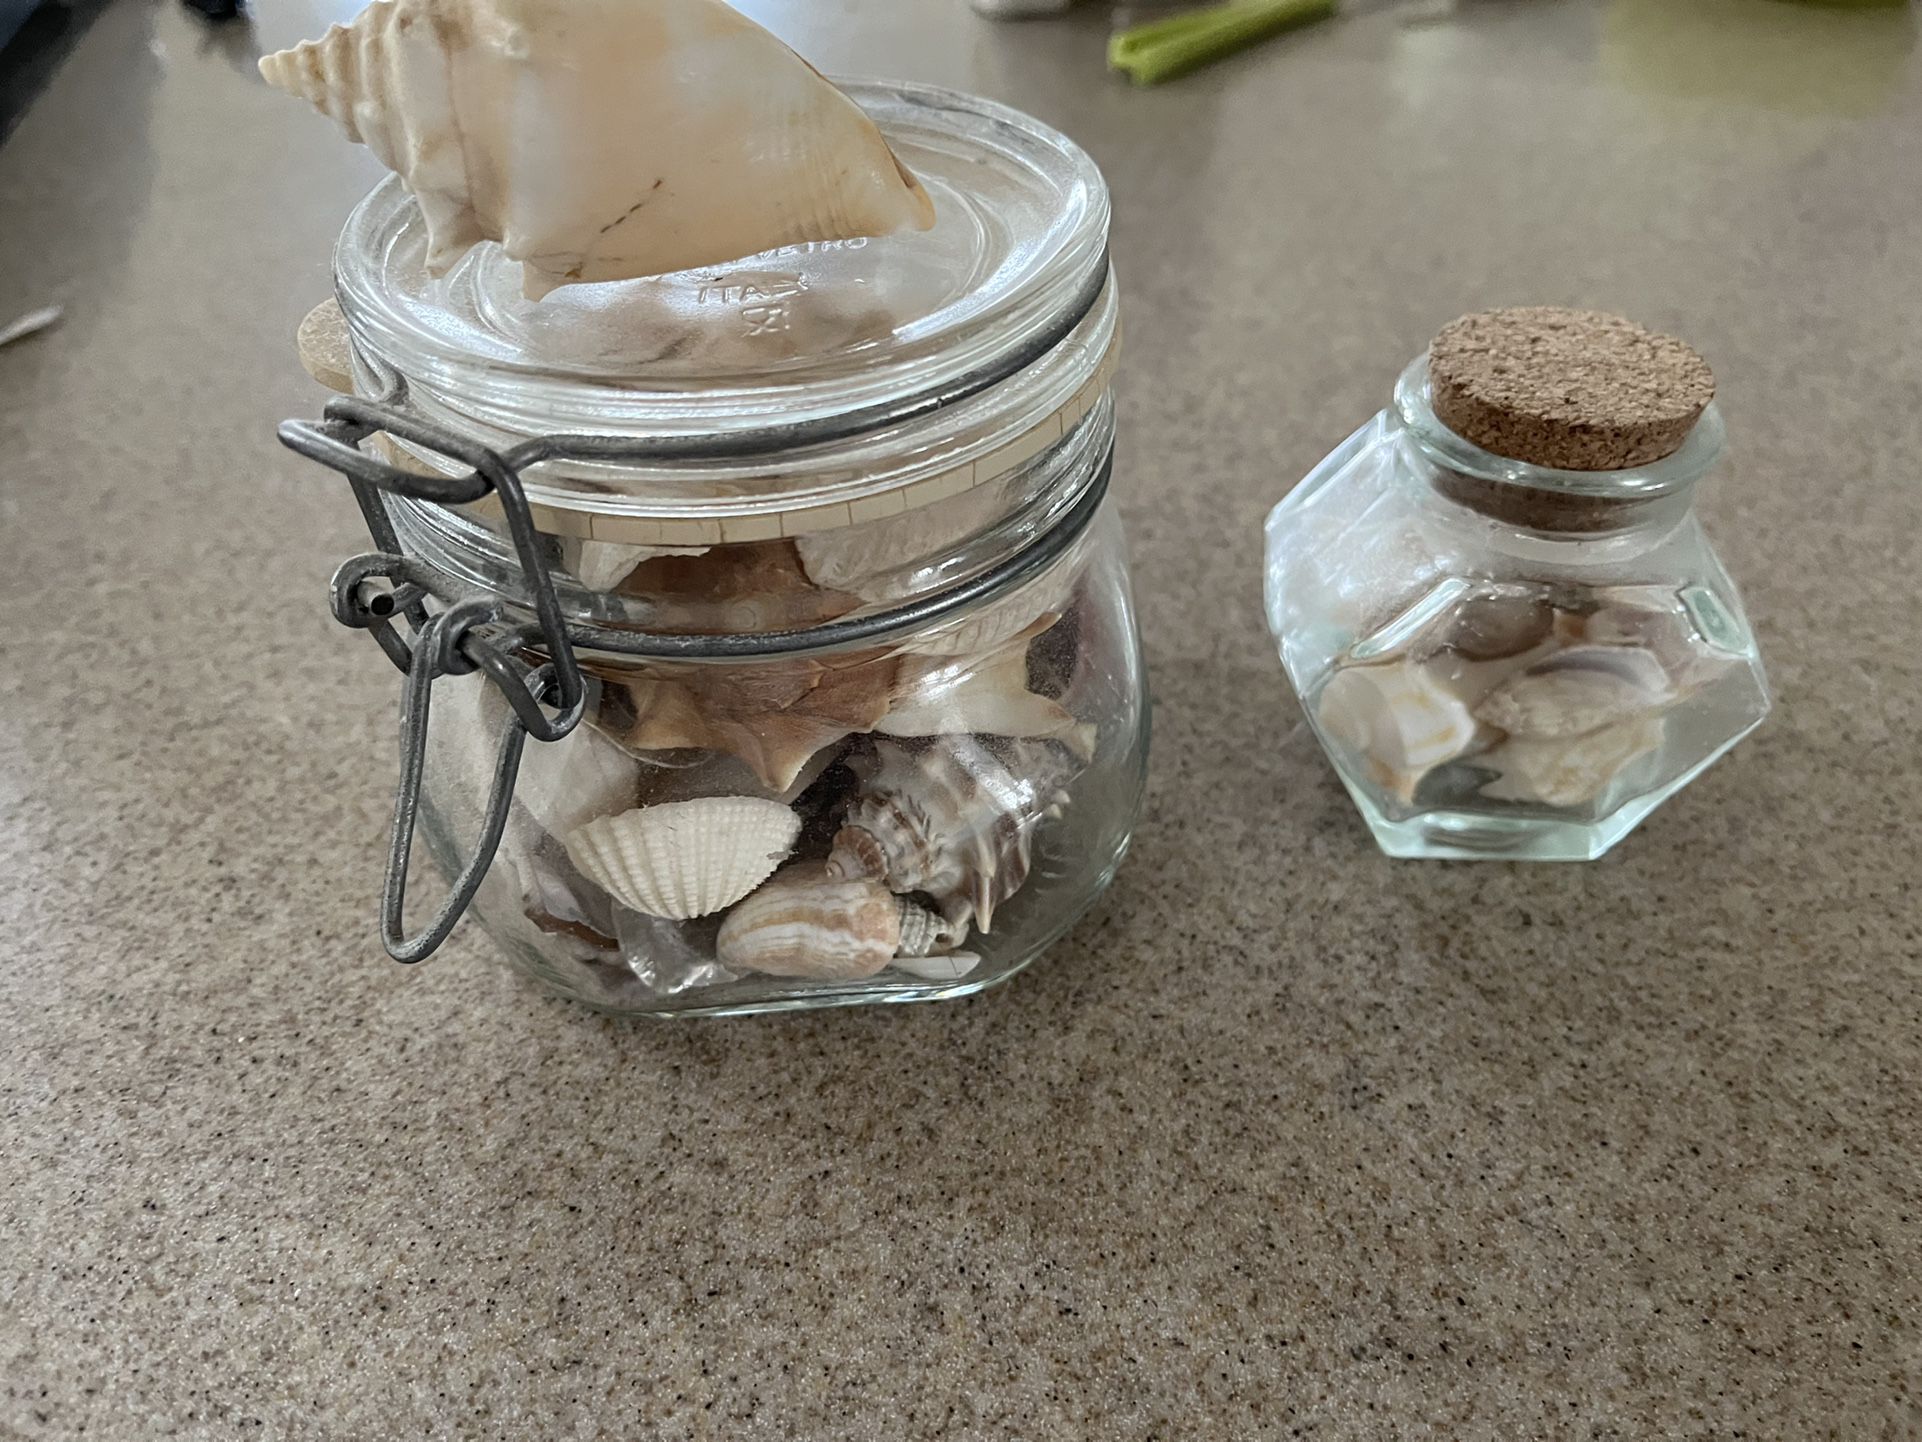 Seashells in a glass container